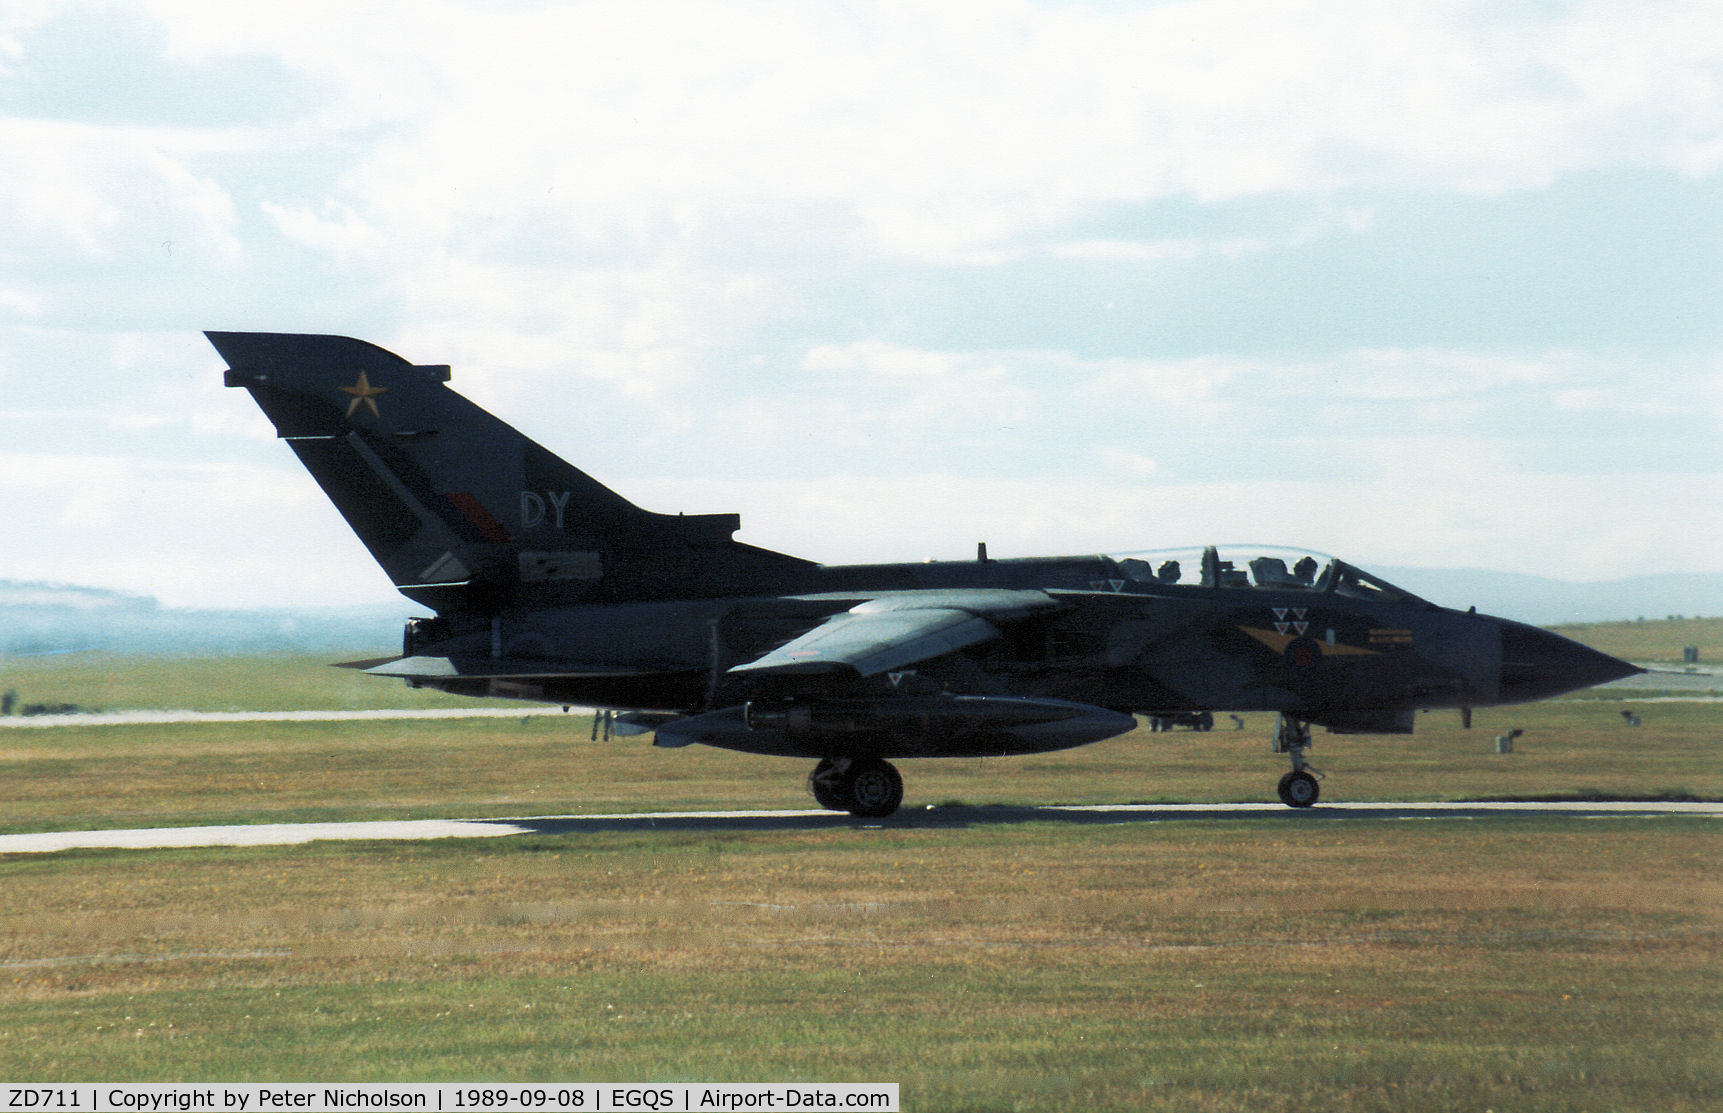 ZD711, 1984 Panavia Tornado GR.1 C/N 329/BT037/3152, Tornado GR.1 of 31 Squadron joining the active runway at RAF Lossiemouth in September 1989.